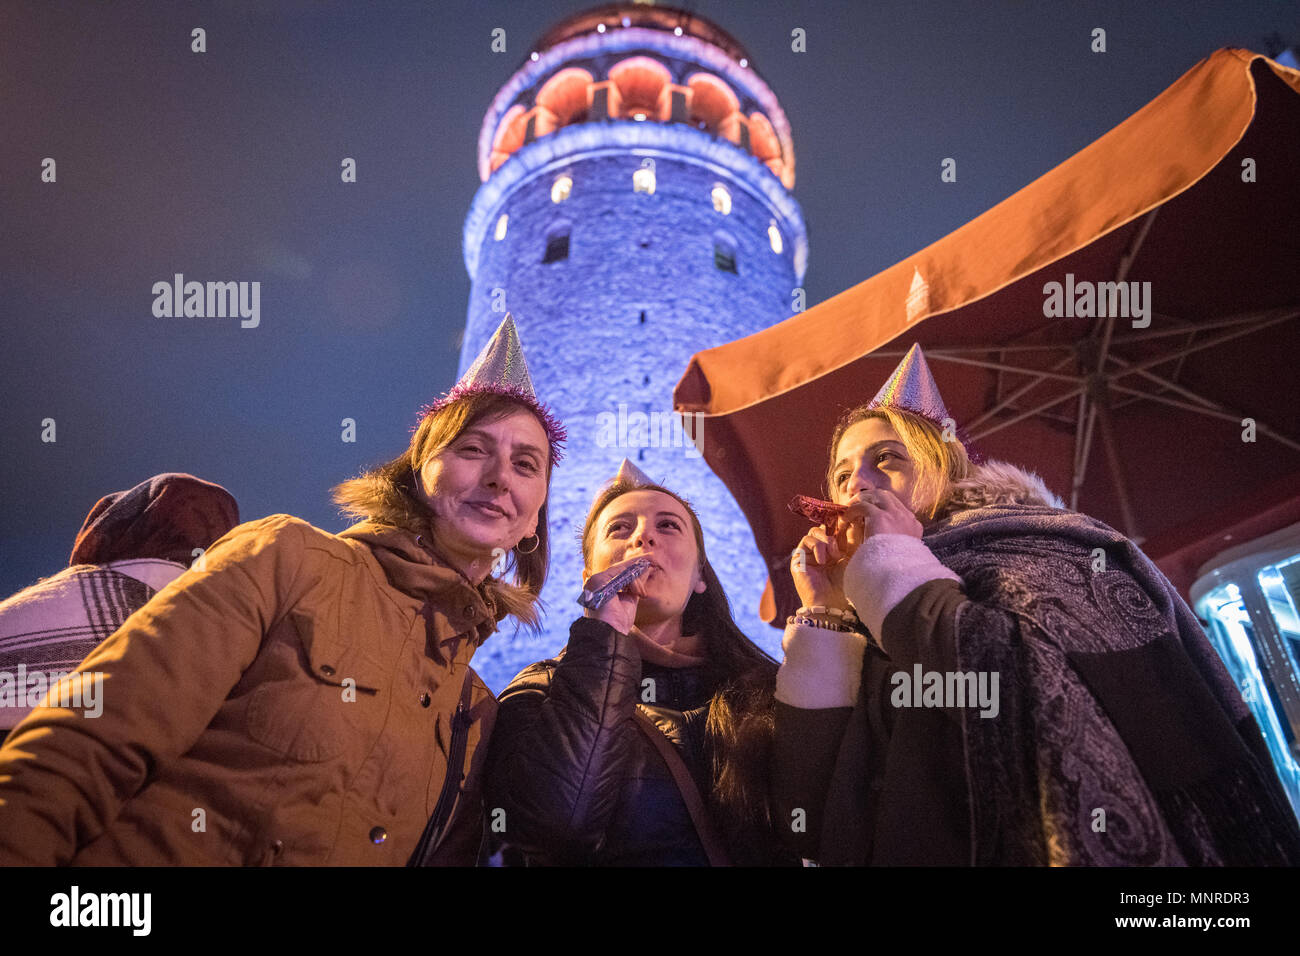 Group of woman stand under the illuminated Galata Kulesi, a medieval tower built by the Byzantines, wearing party hats and ready to celebrate in Istan Stock Photo